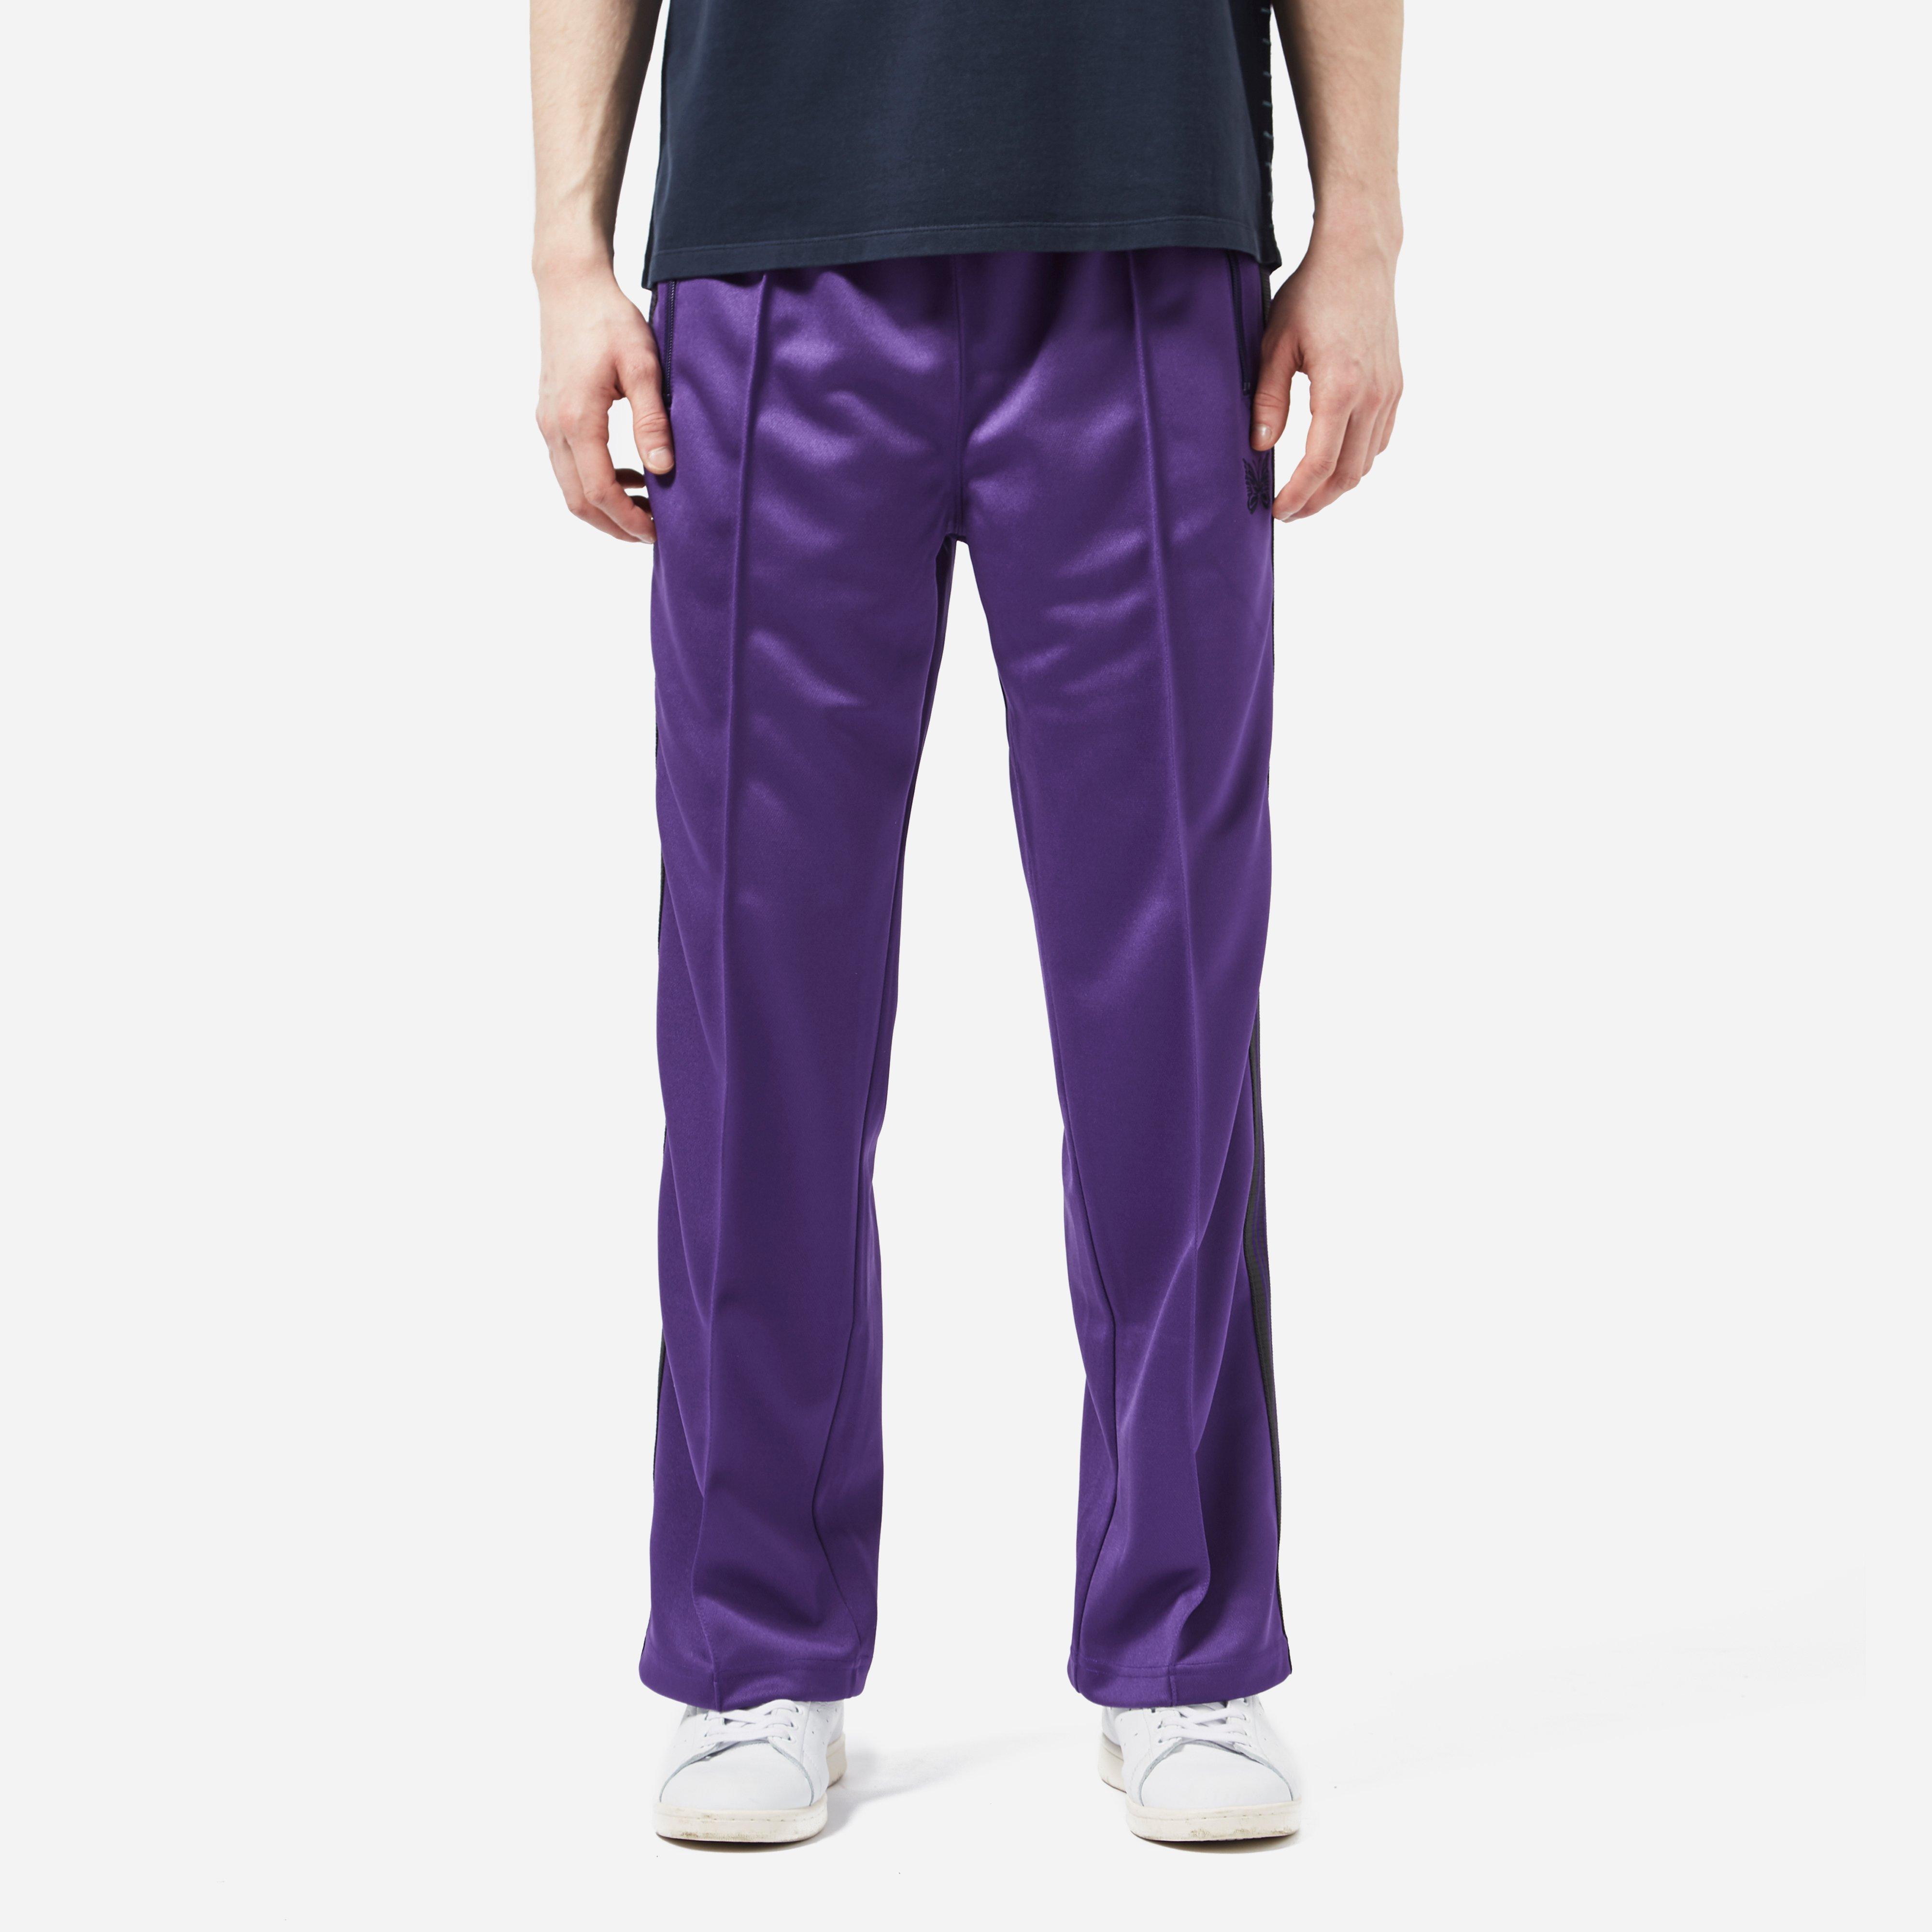 Needles Track Pant in Purple for Men - Lyst